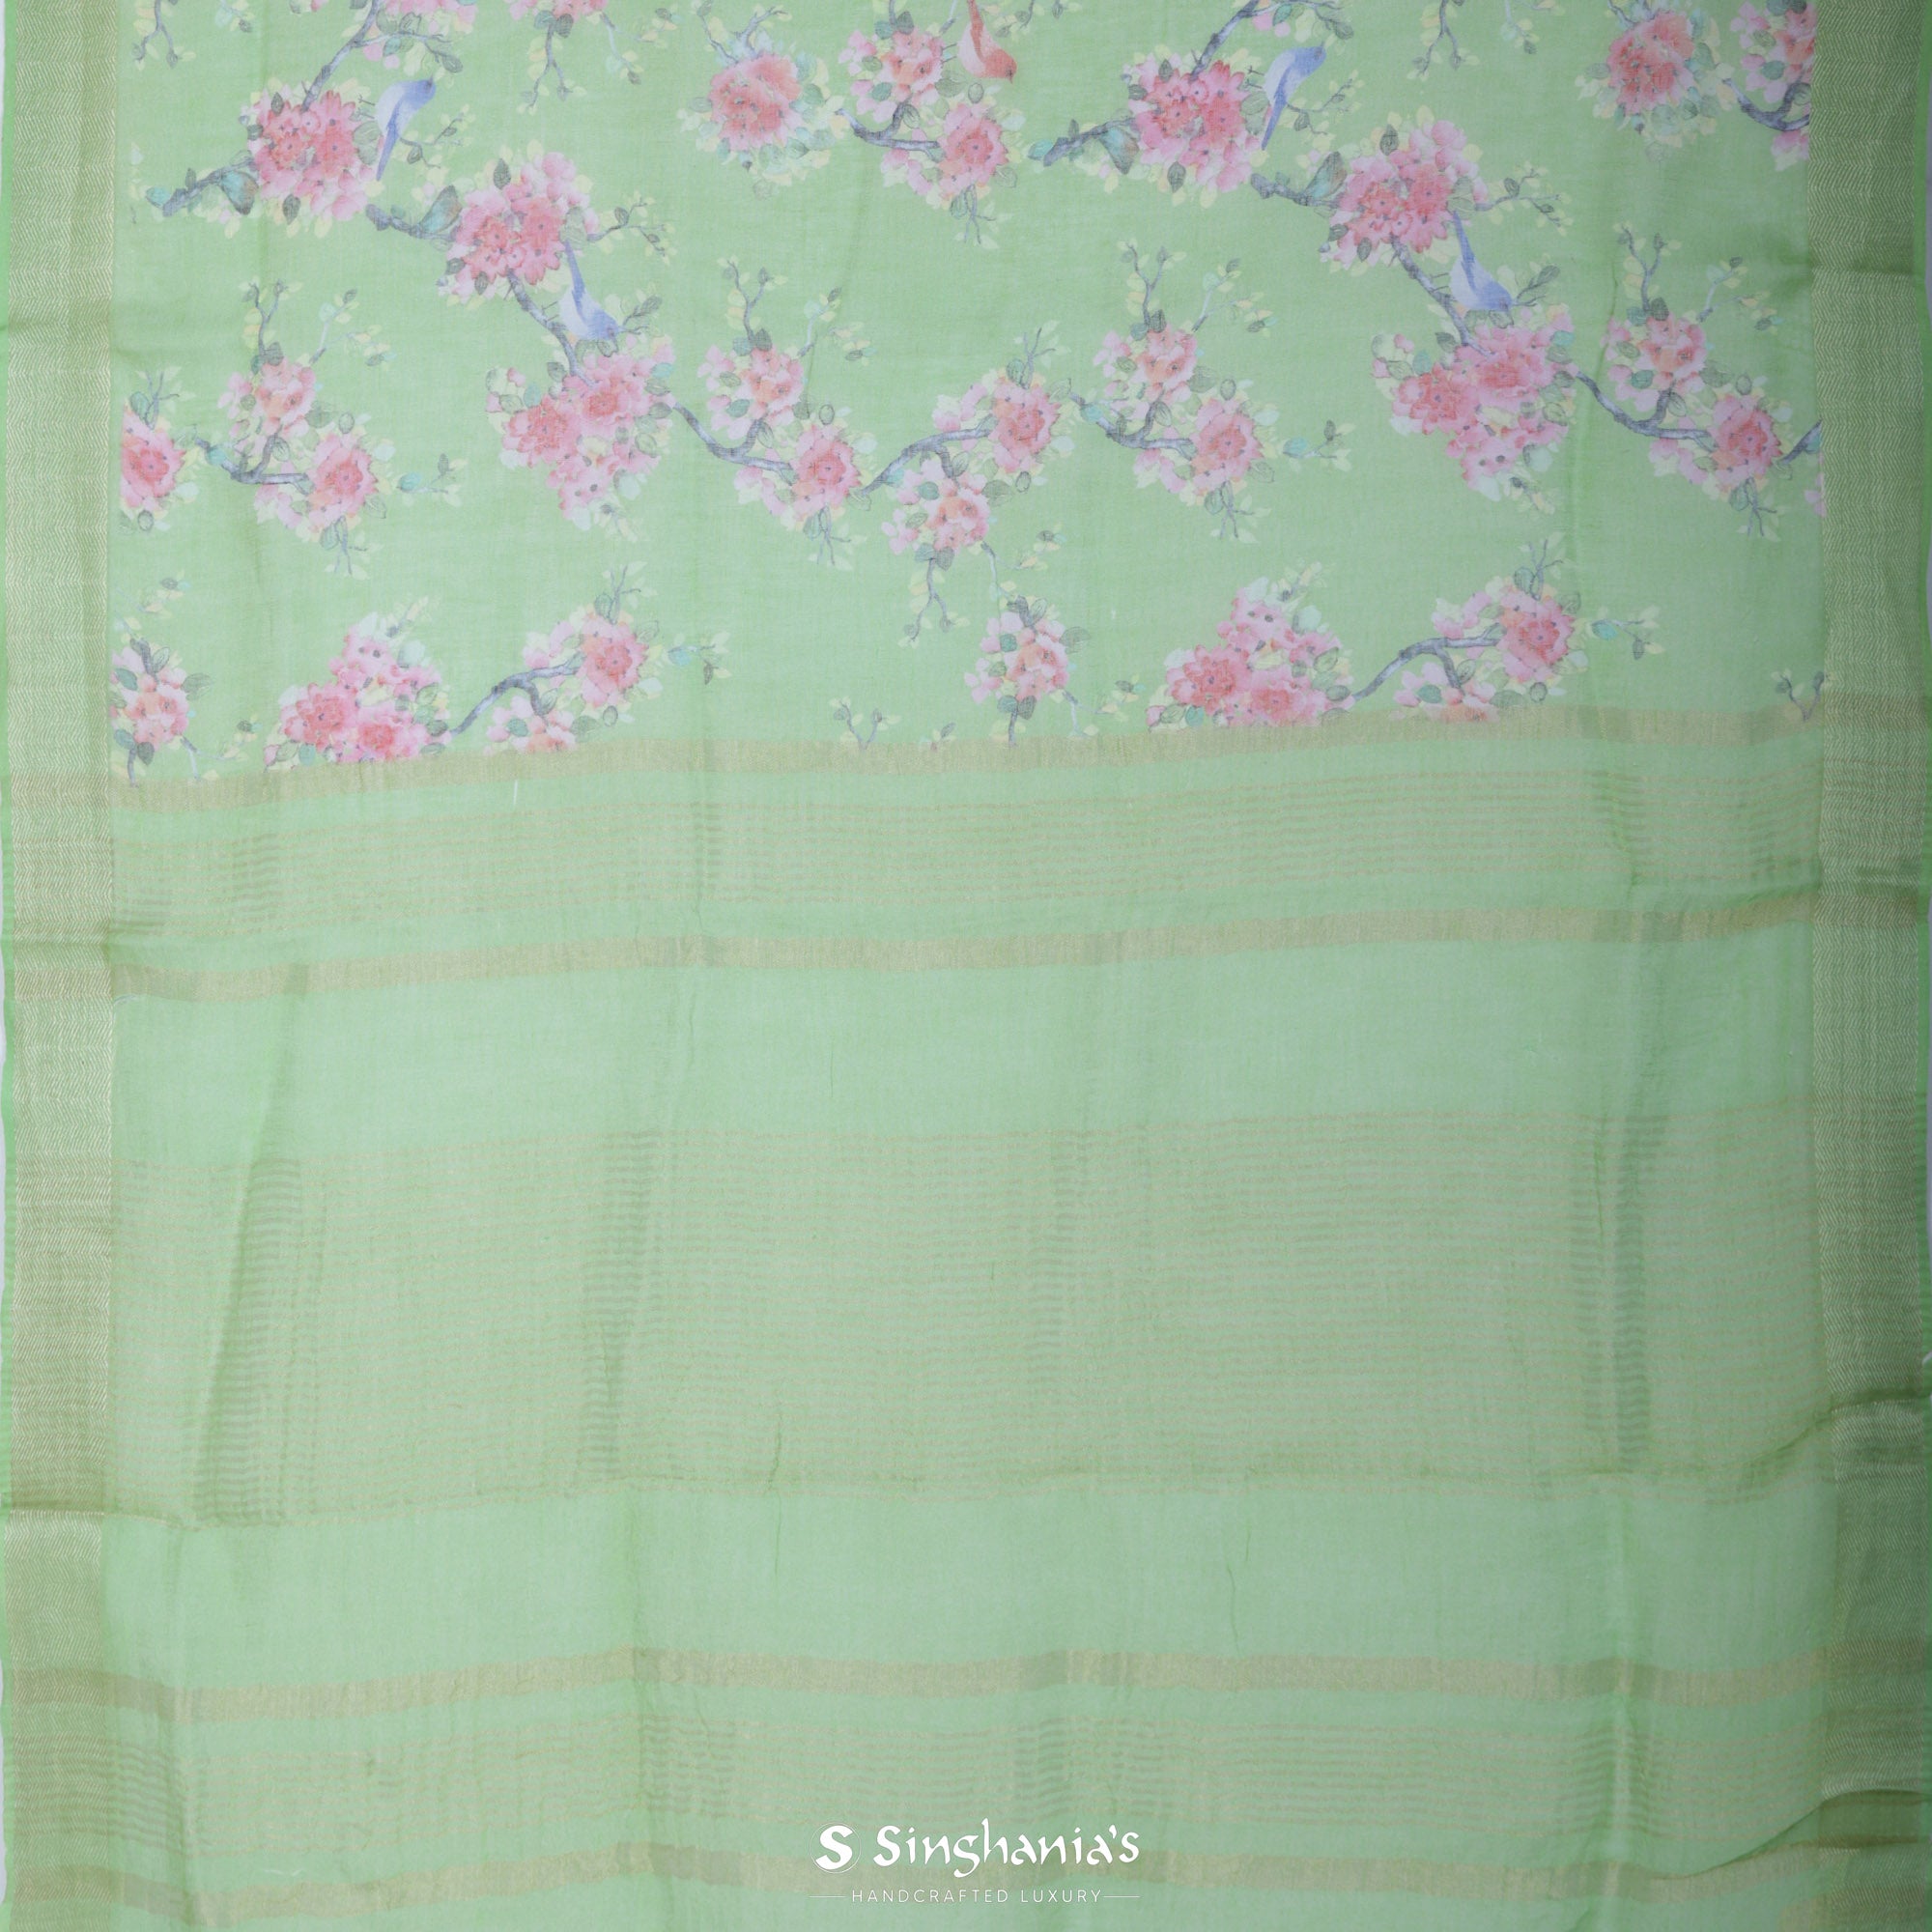 Mantis Green Printed Linen Saree With Floral Jaal Design